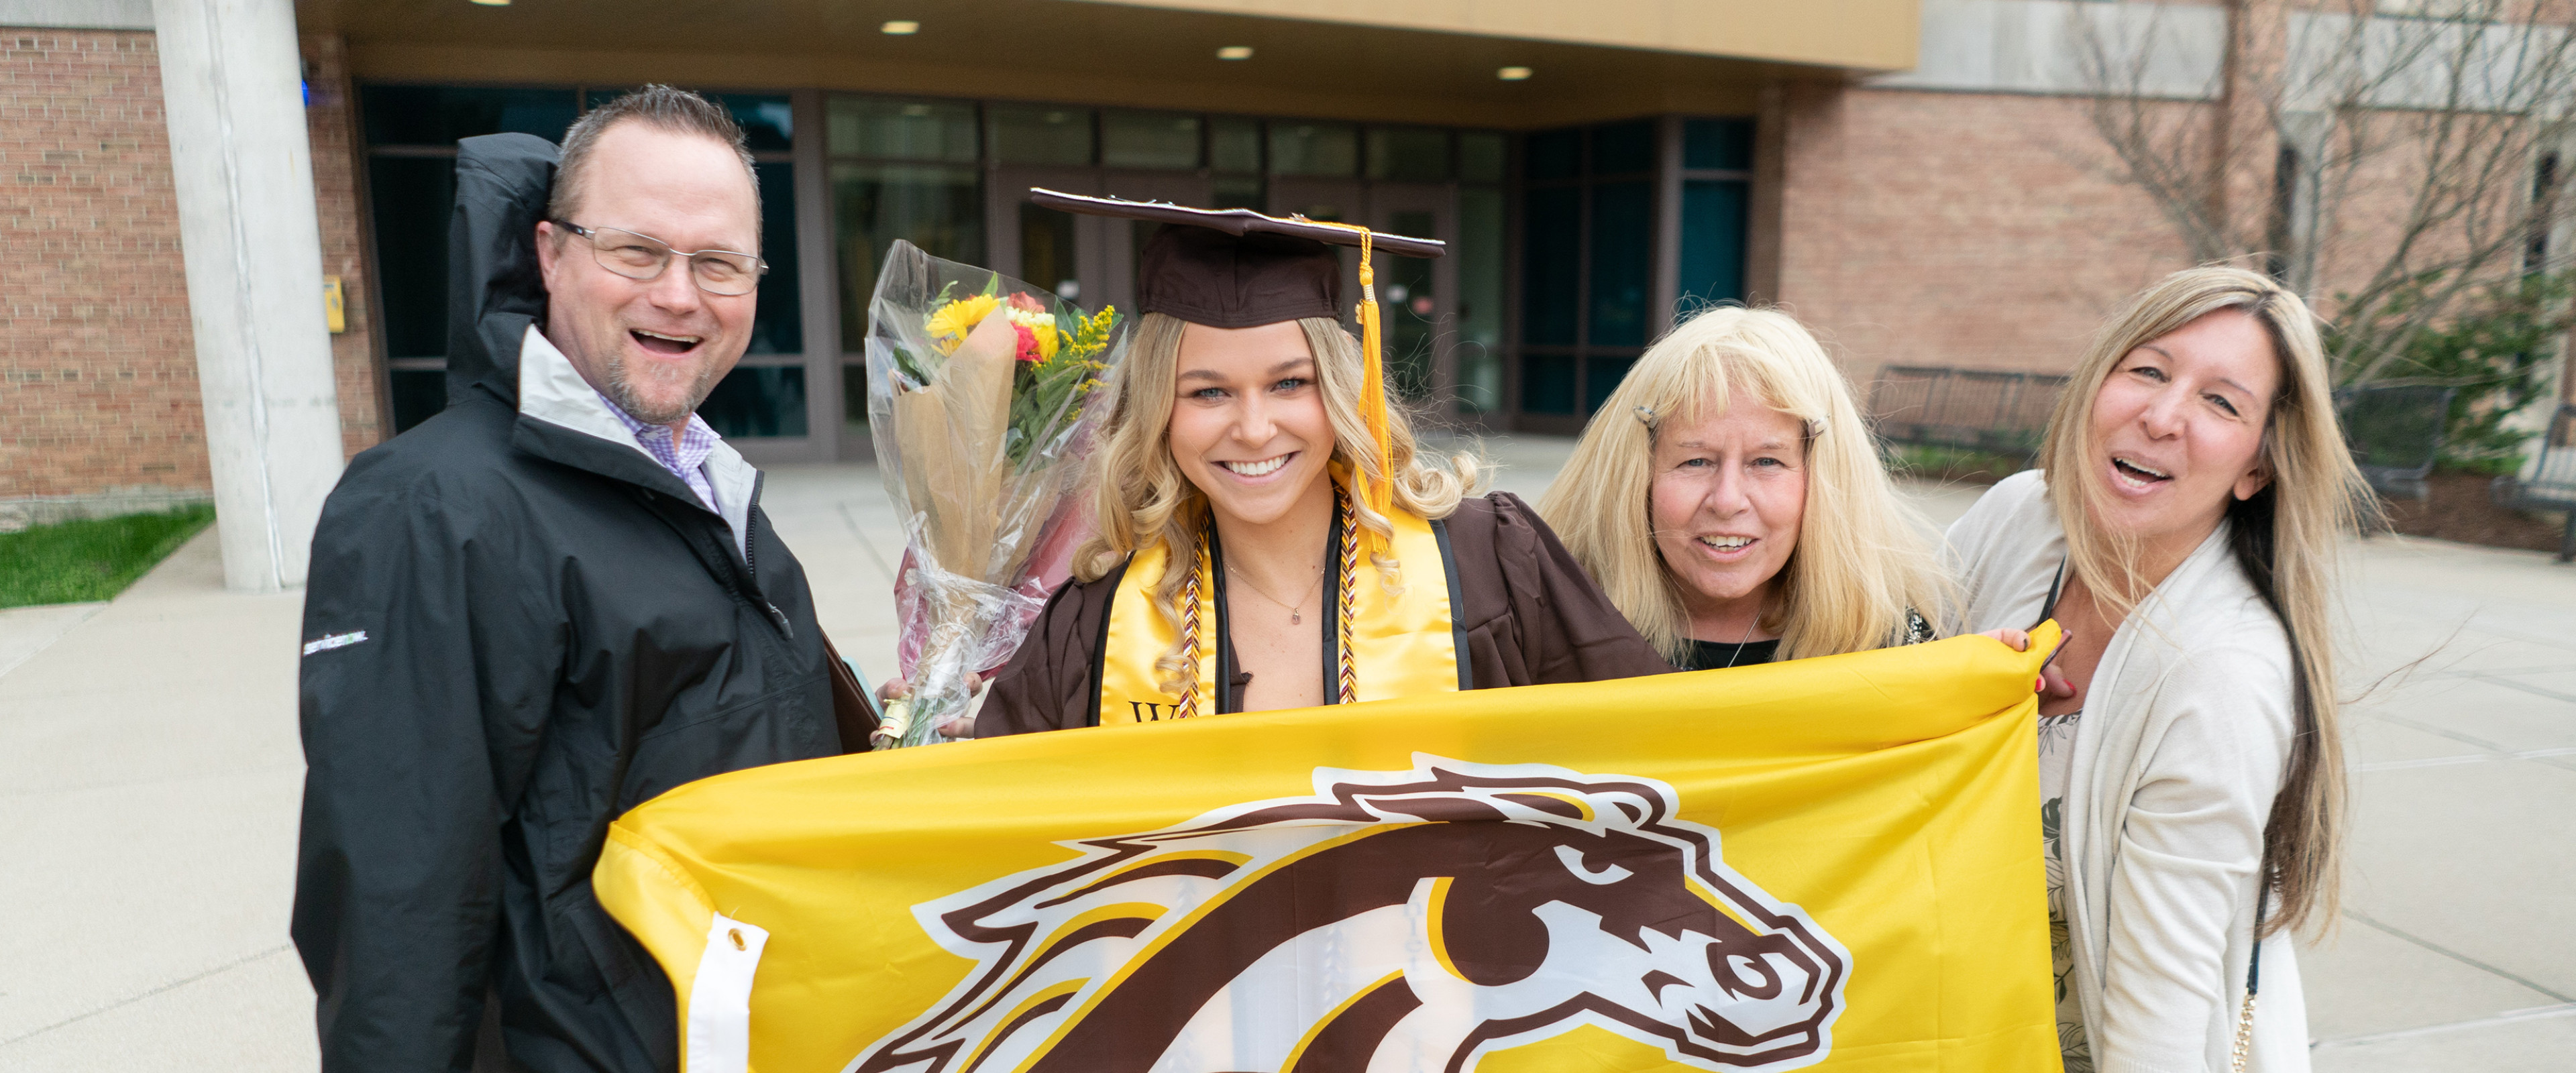 Student with family at graduation